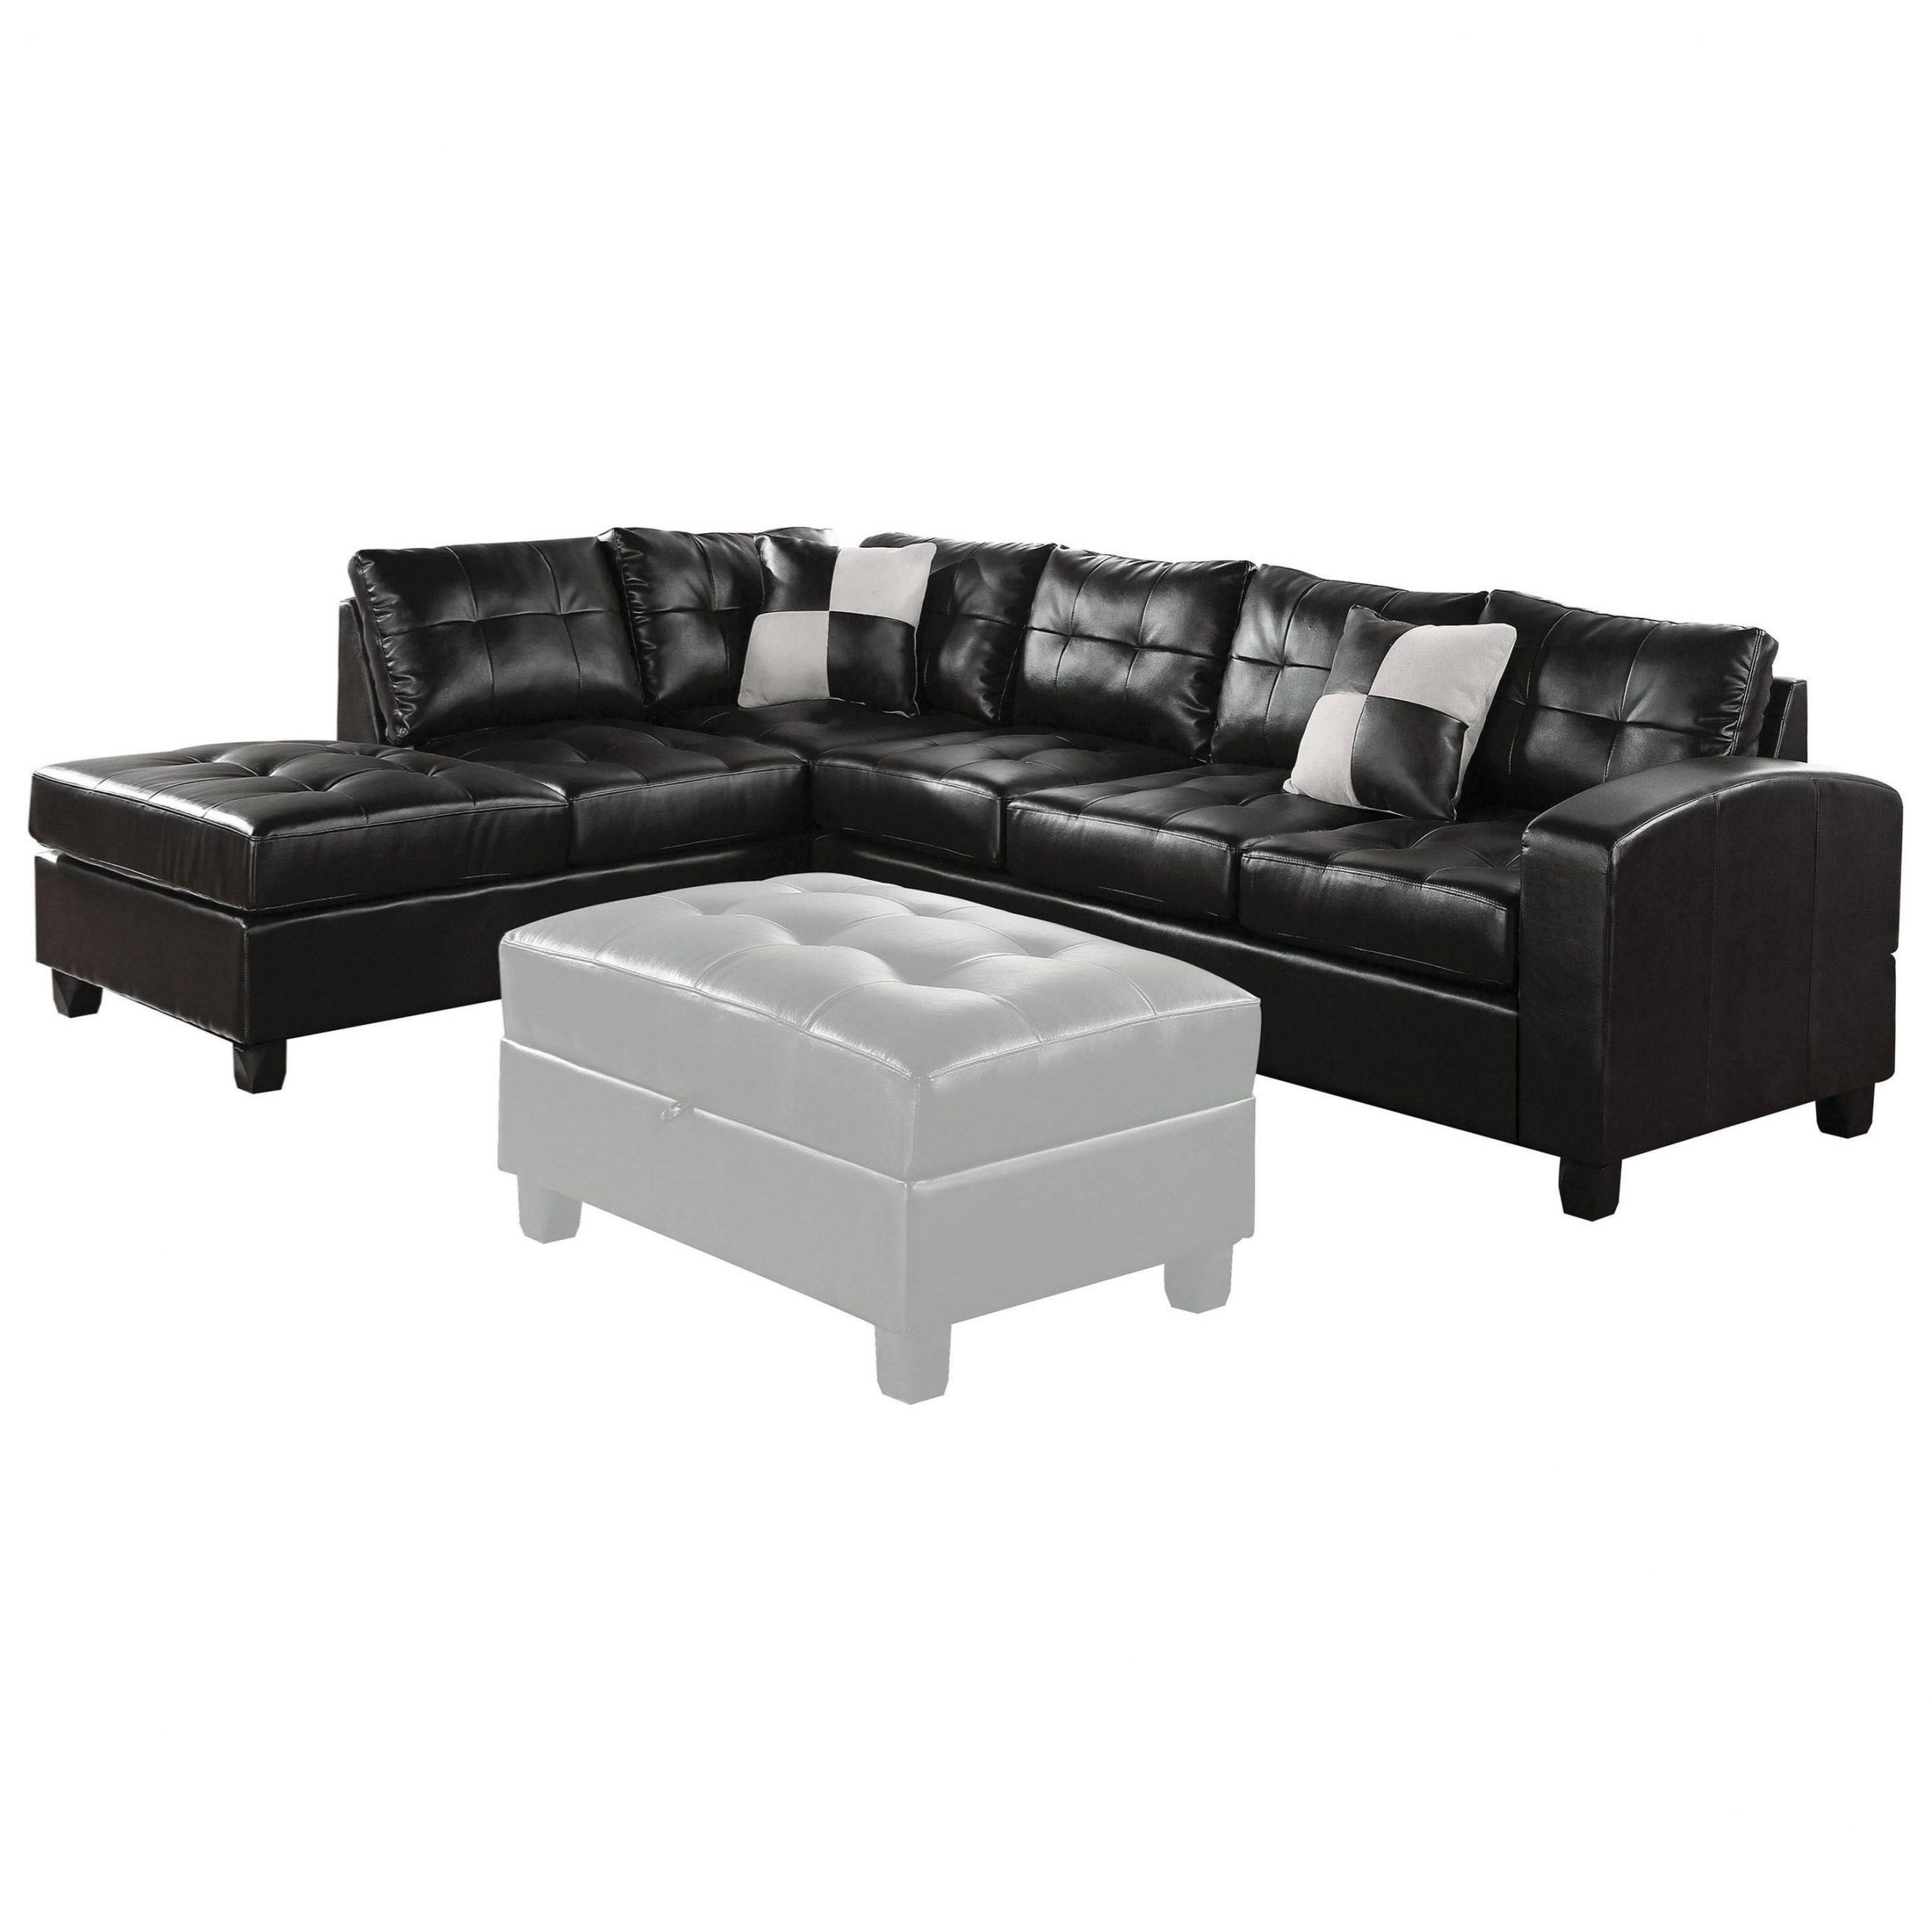 Widely Used Clifton Reversible Sectional Sofas With Pillows Regarding Acme Furniture Kiva 51195_kit Sectional Sofa W/2 Pillows (Photo 22 of 25)